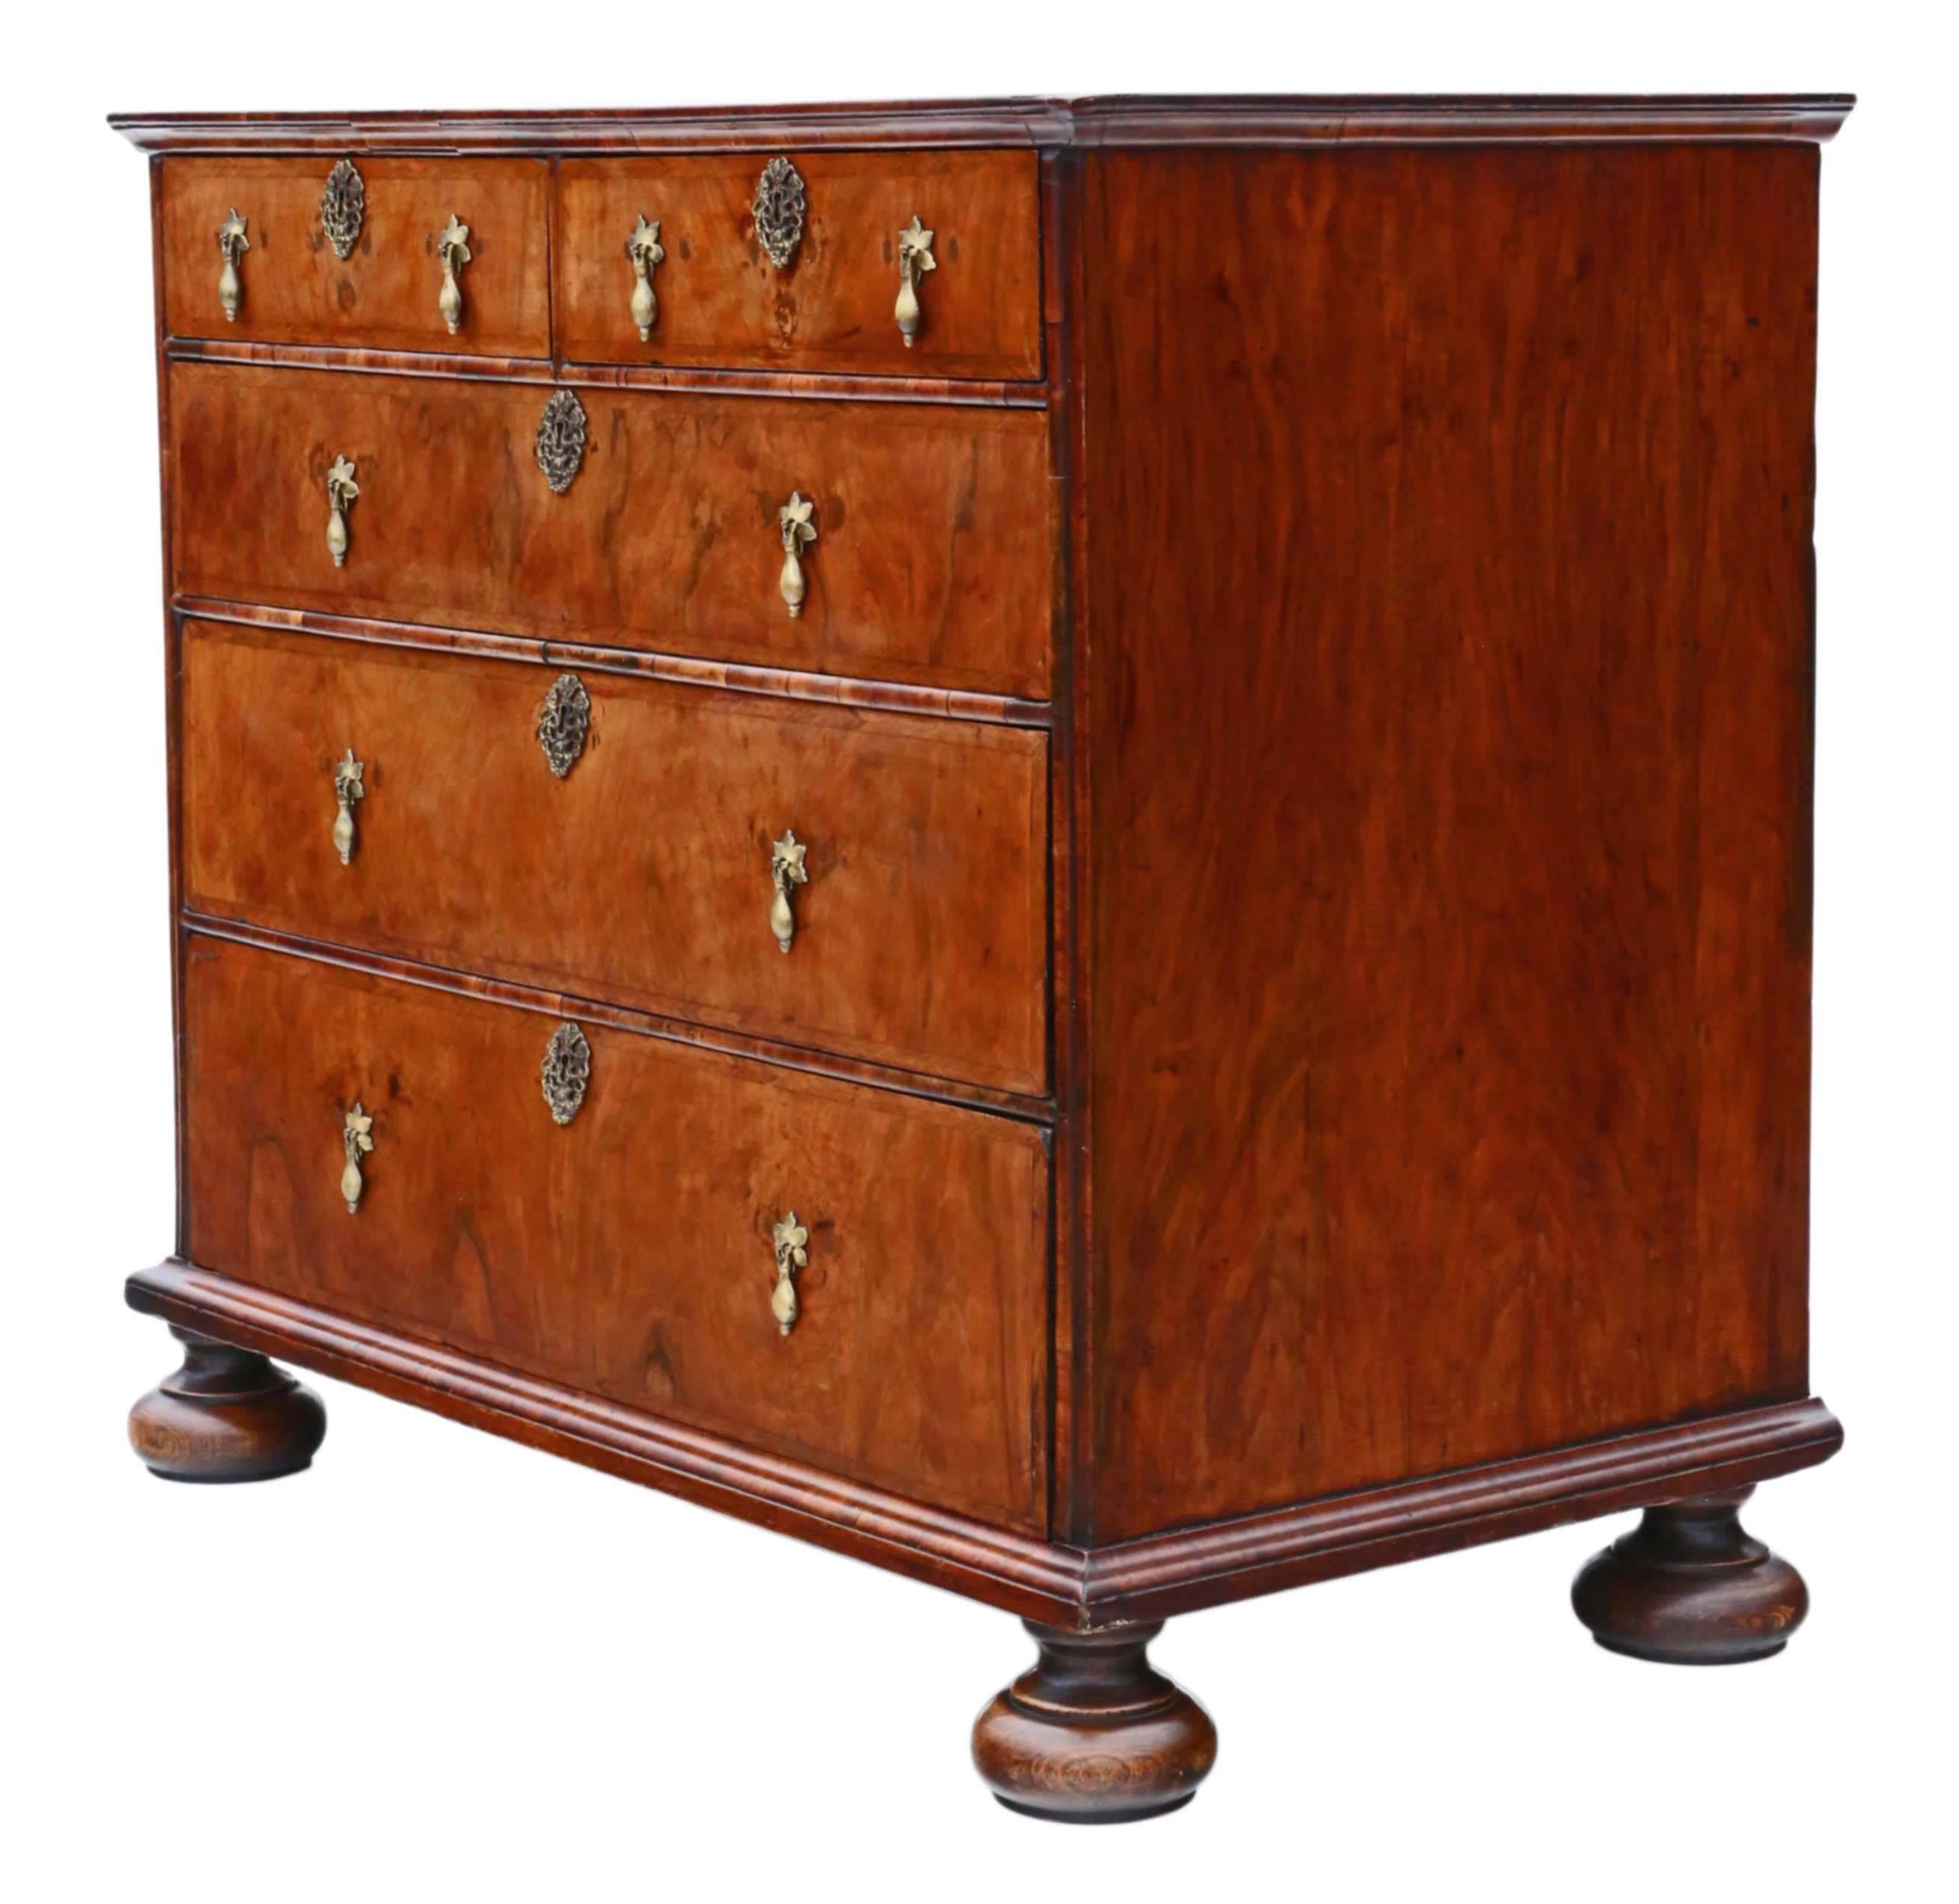 Antique Quality William & Mary circa 1690-1700 Walnut Chest Of Drawers In Good Condition For Sale In Wisbech, Walton Wisbech